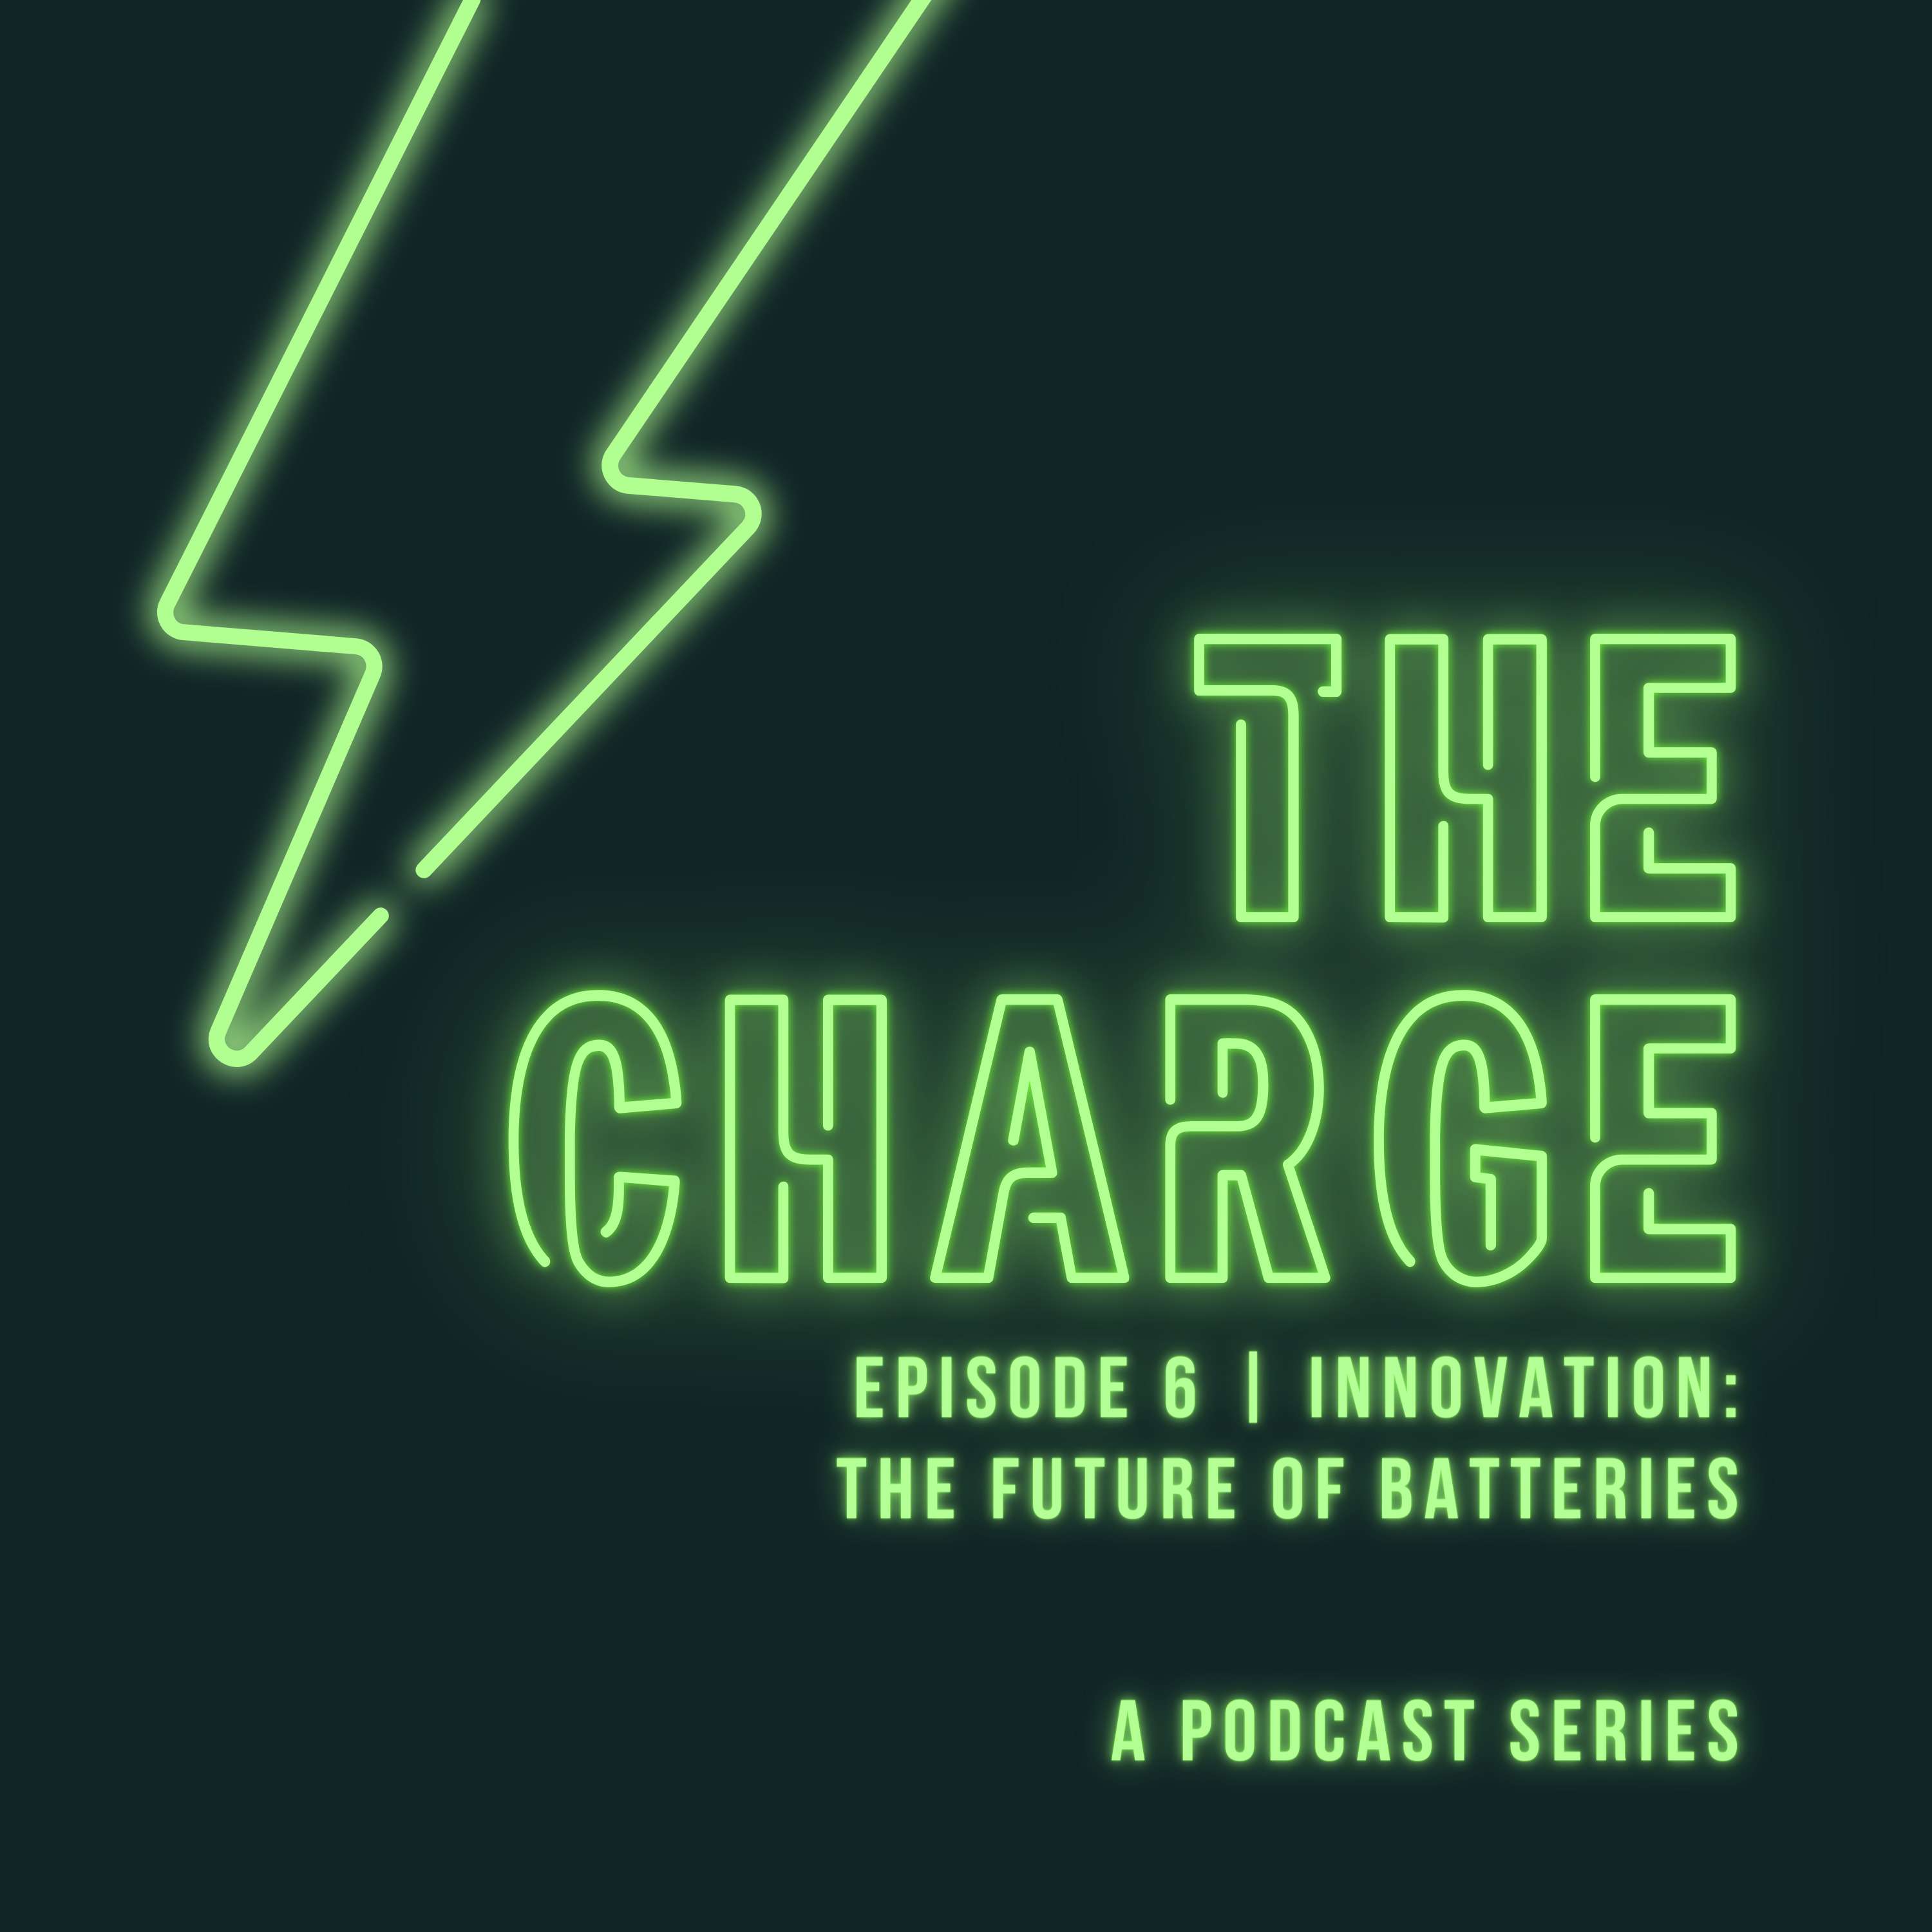 Innovation: The future of batteries